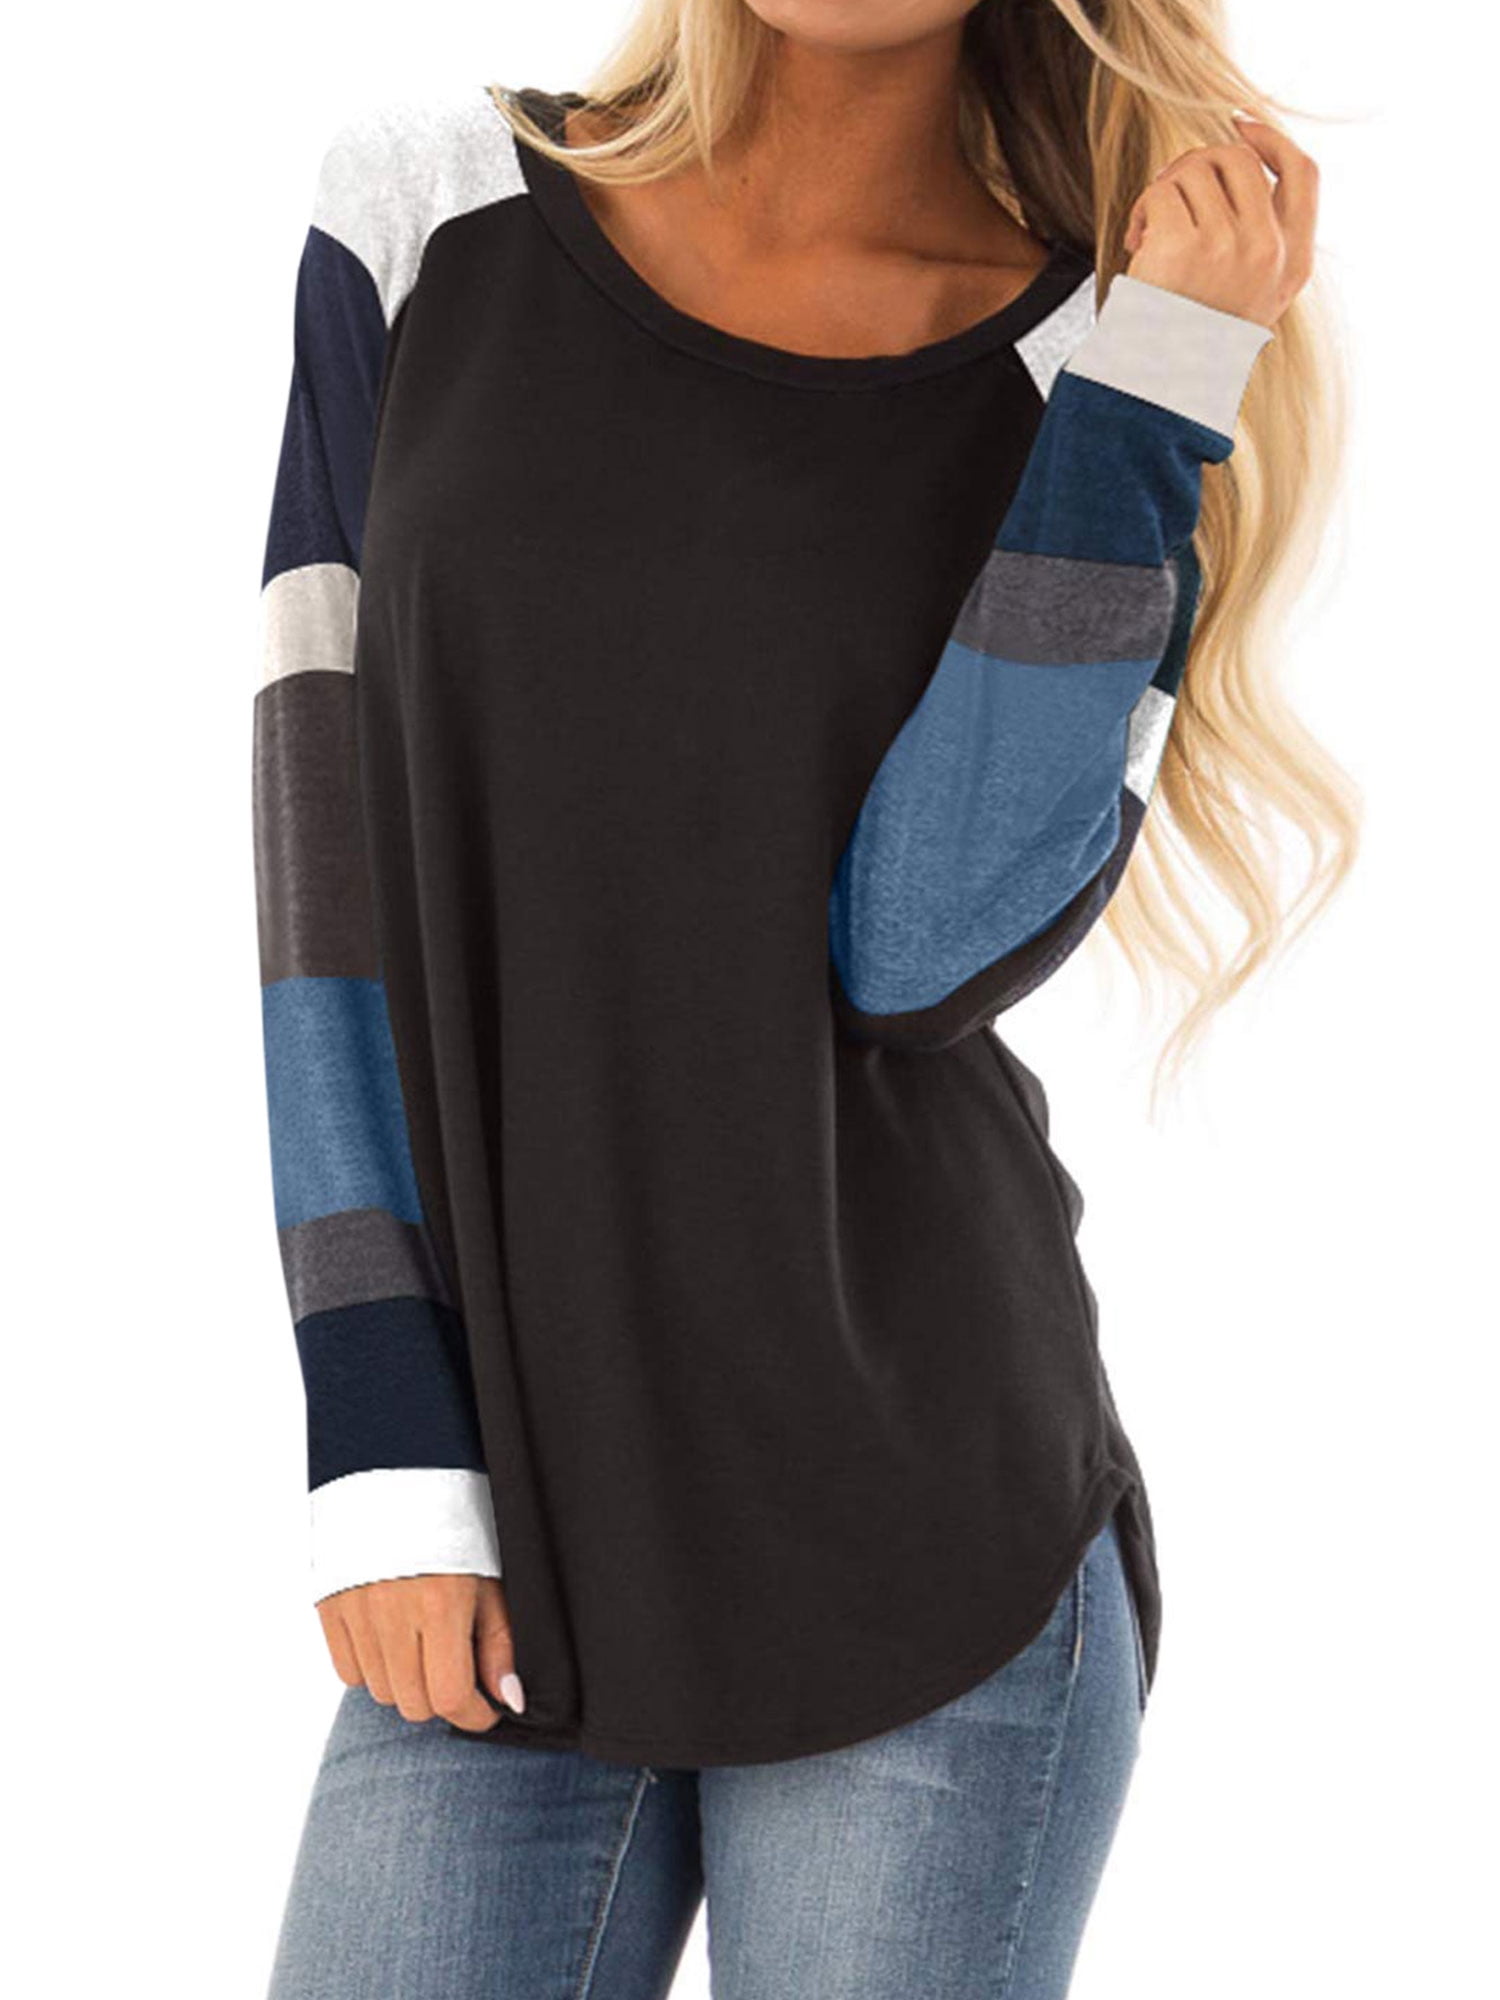 Womens Casual Tops Crewneck Stripe Color Block Tshirts Loose Fit Pullover 